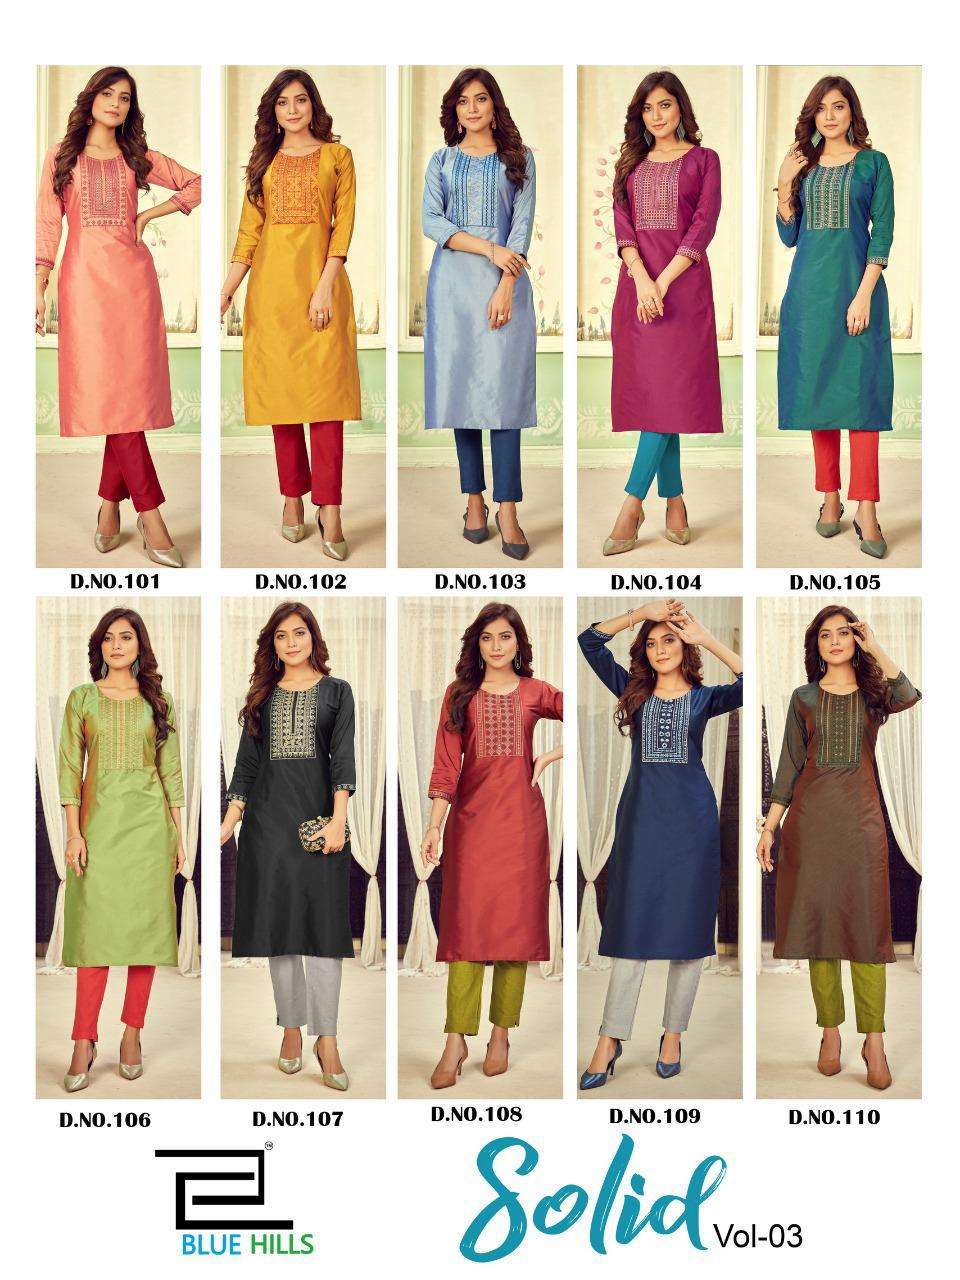 BLUE HILLS PRESENTS SOLID VOL 03 COTTON EMVBROIDERY FASTIVE KURTI COLLECTION